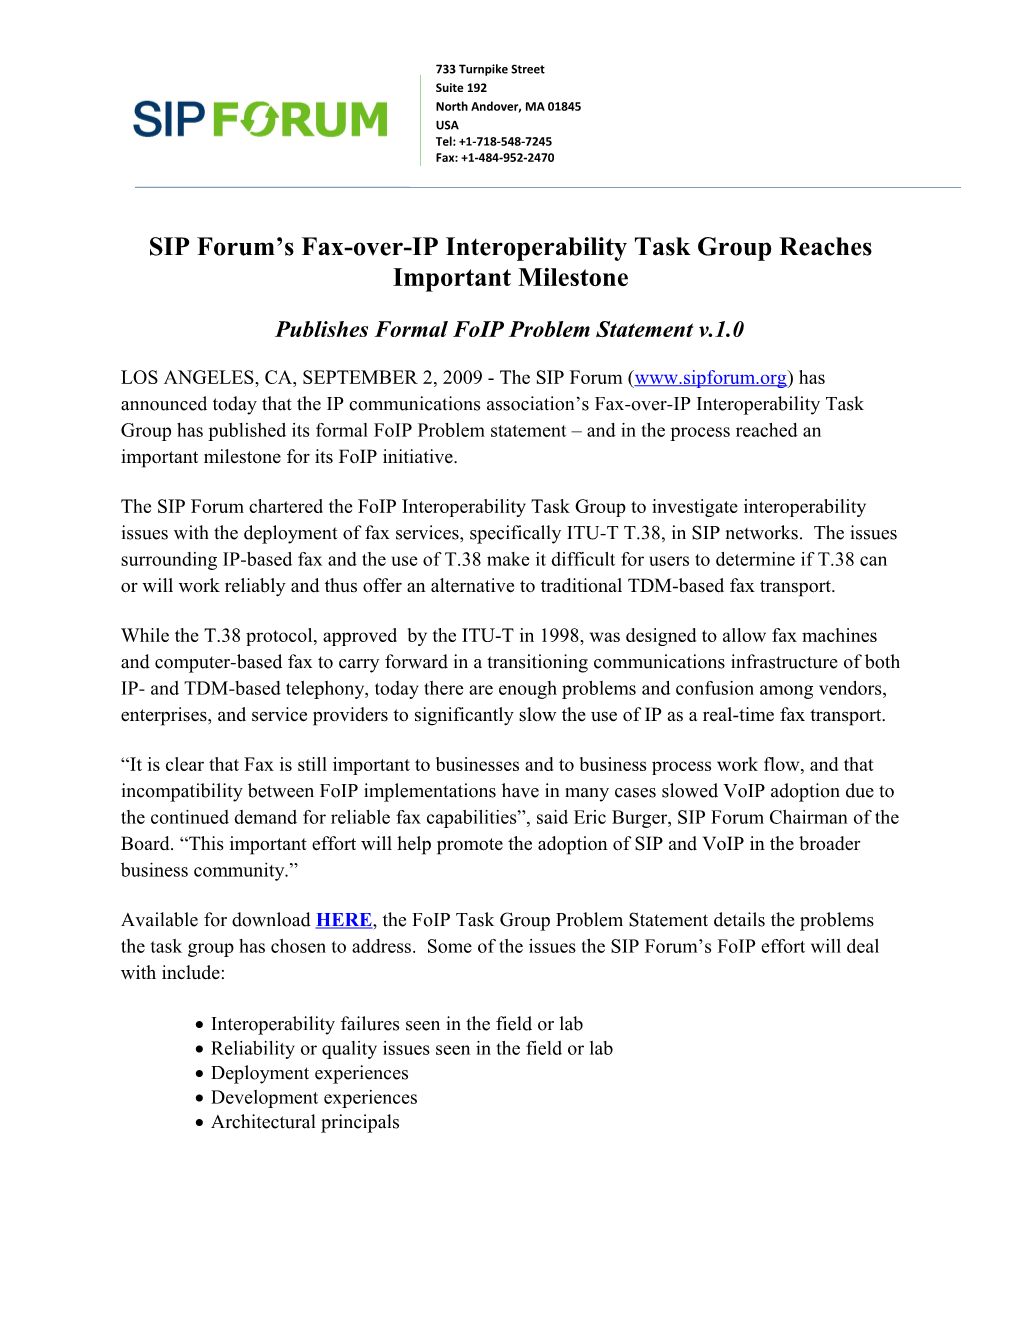 SIP Forum S Fax-Over-IP Interoperability Task Group Reaches Important Milestone